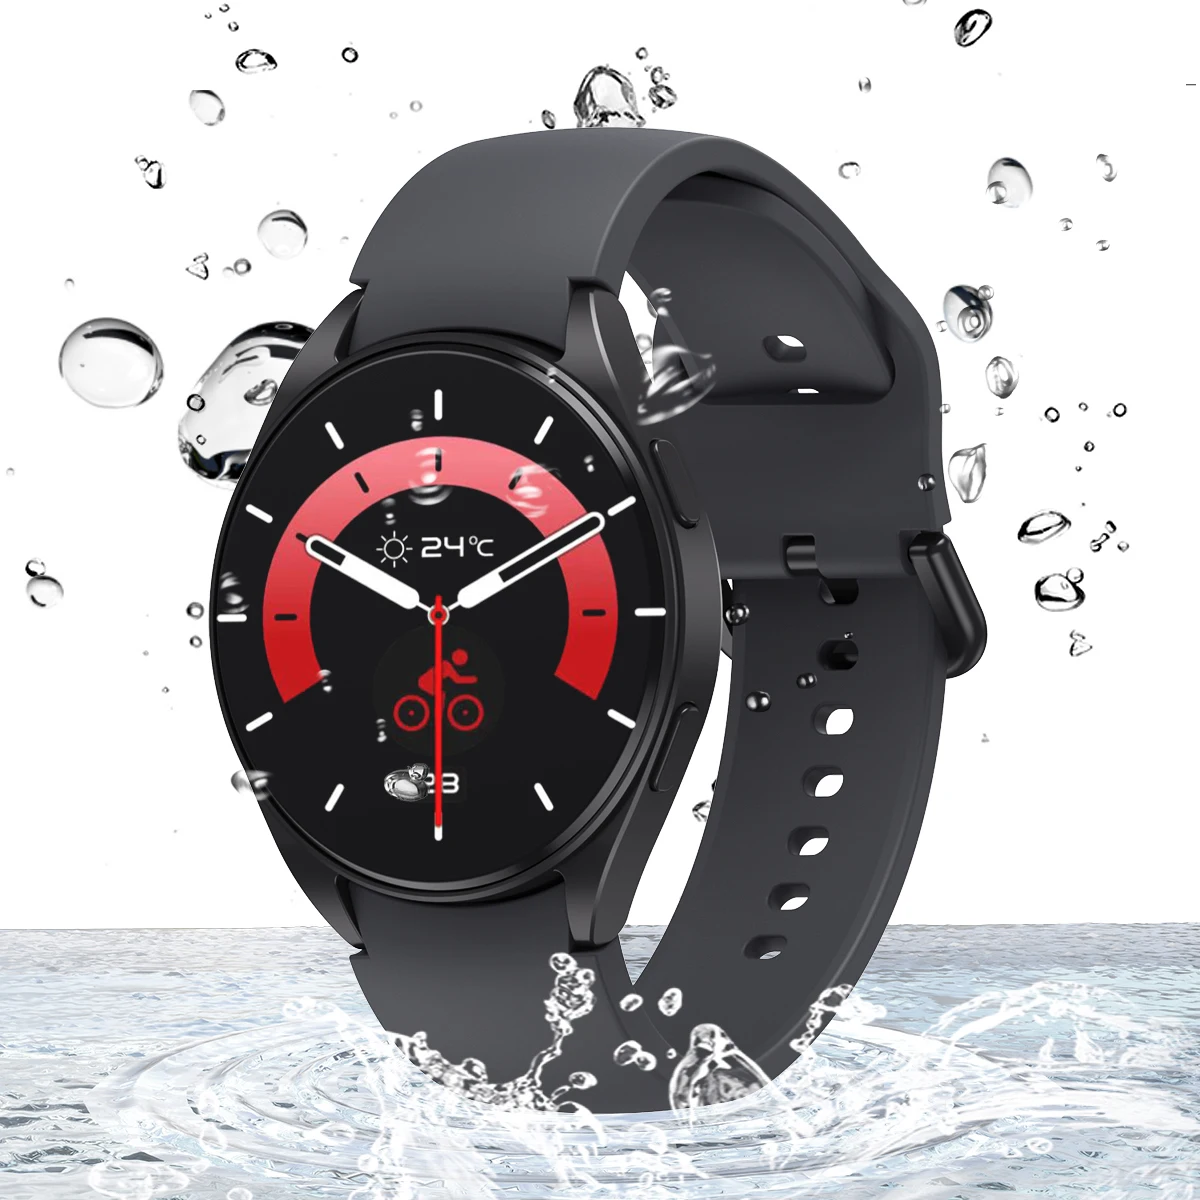 

New Smartwatch TF5 PRO 1.39 Inch Round Screen AI Voice Assistant Inteligente Heart Rate Monitoring BT Calling Bracelet for Apple